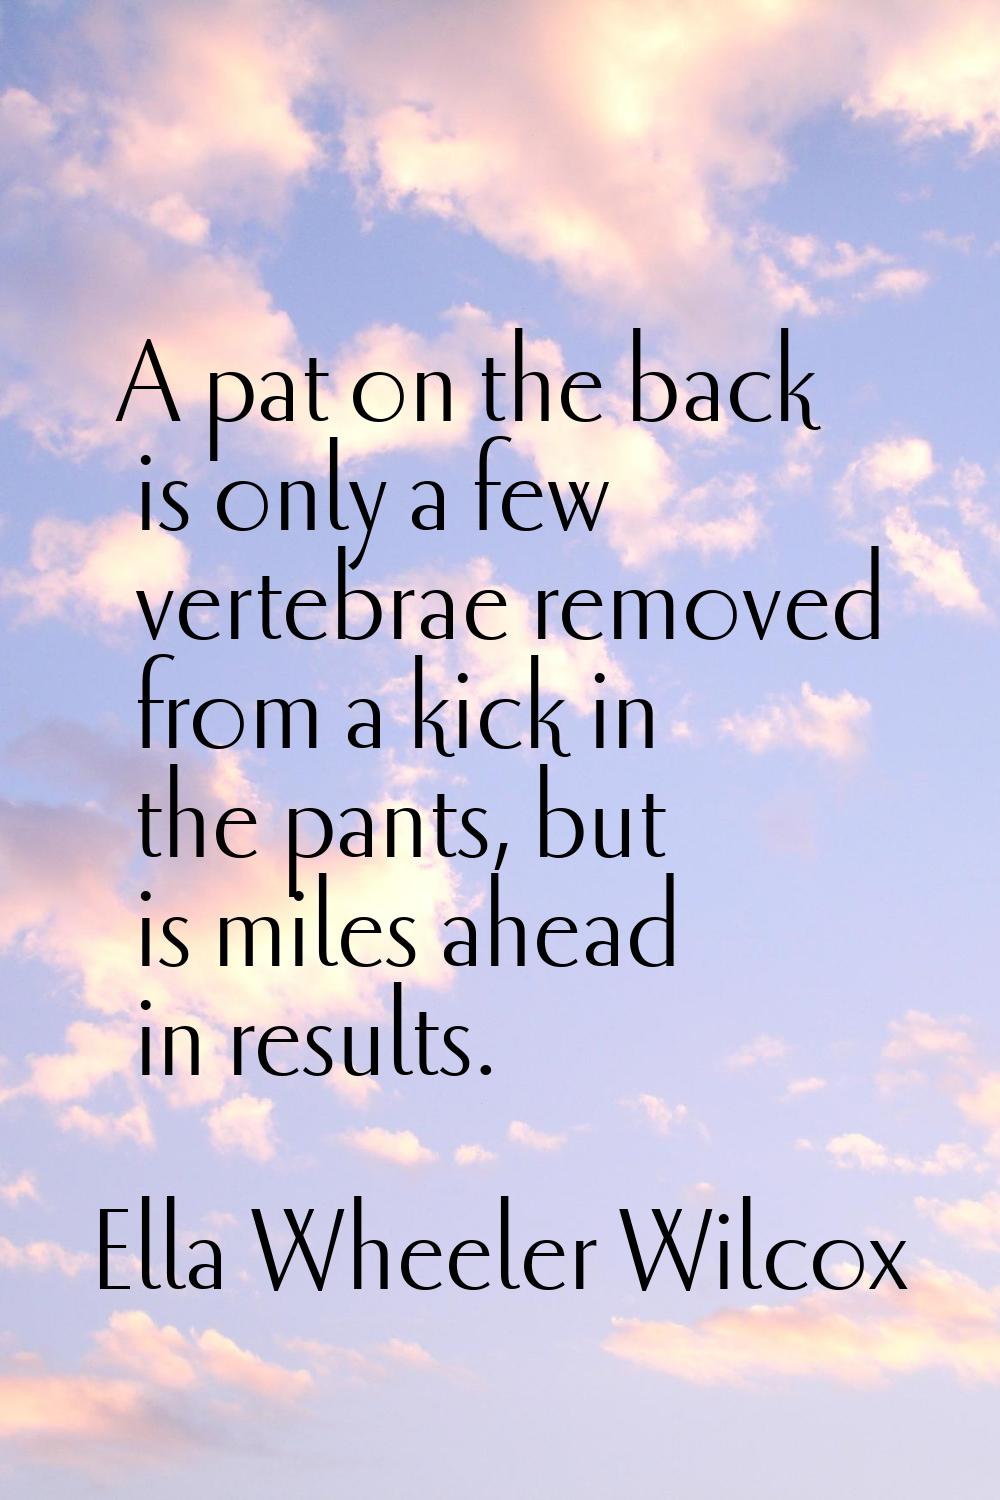 A pat on the back is only a few vertebrae removed from a kick in the pants, but is miles ahead in r